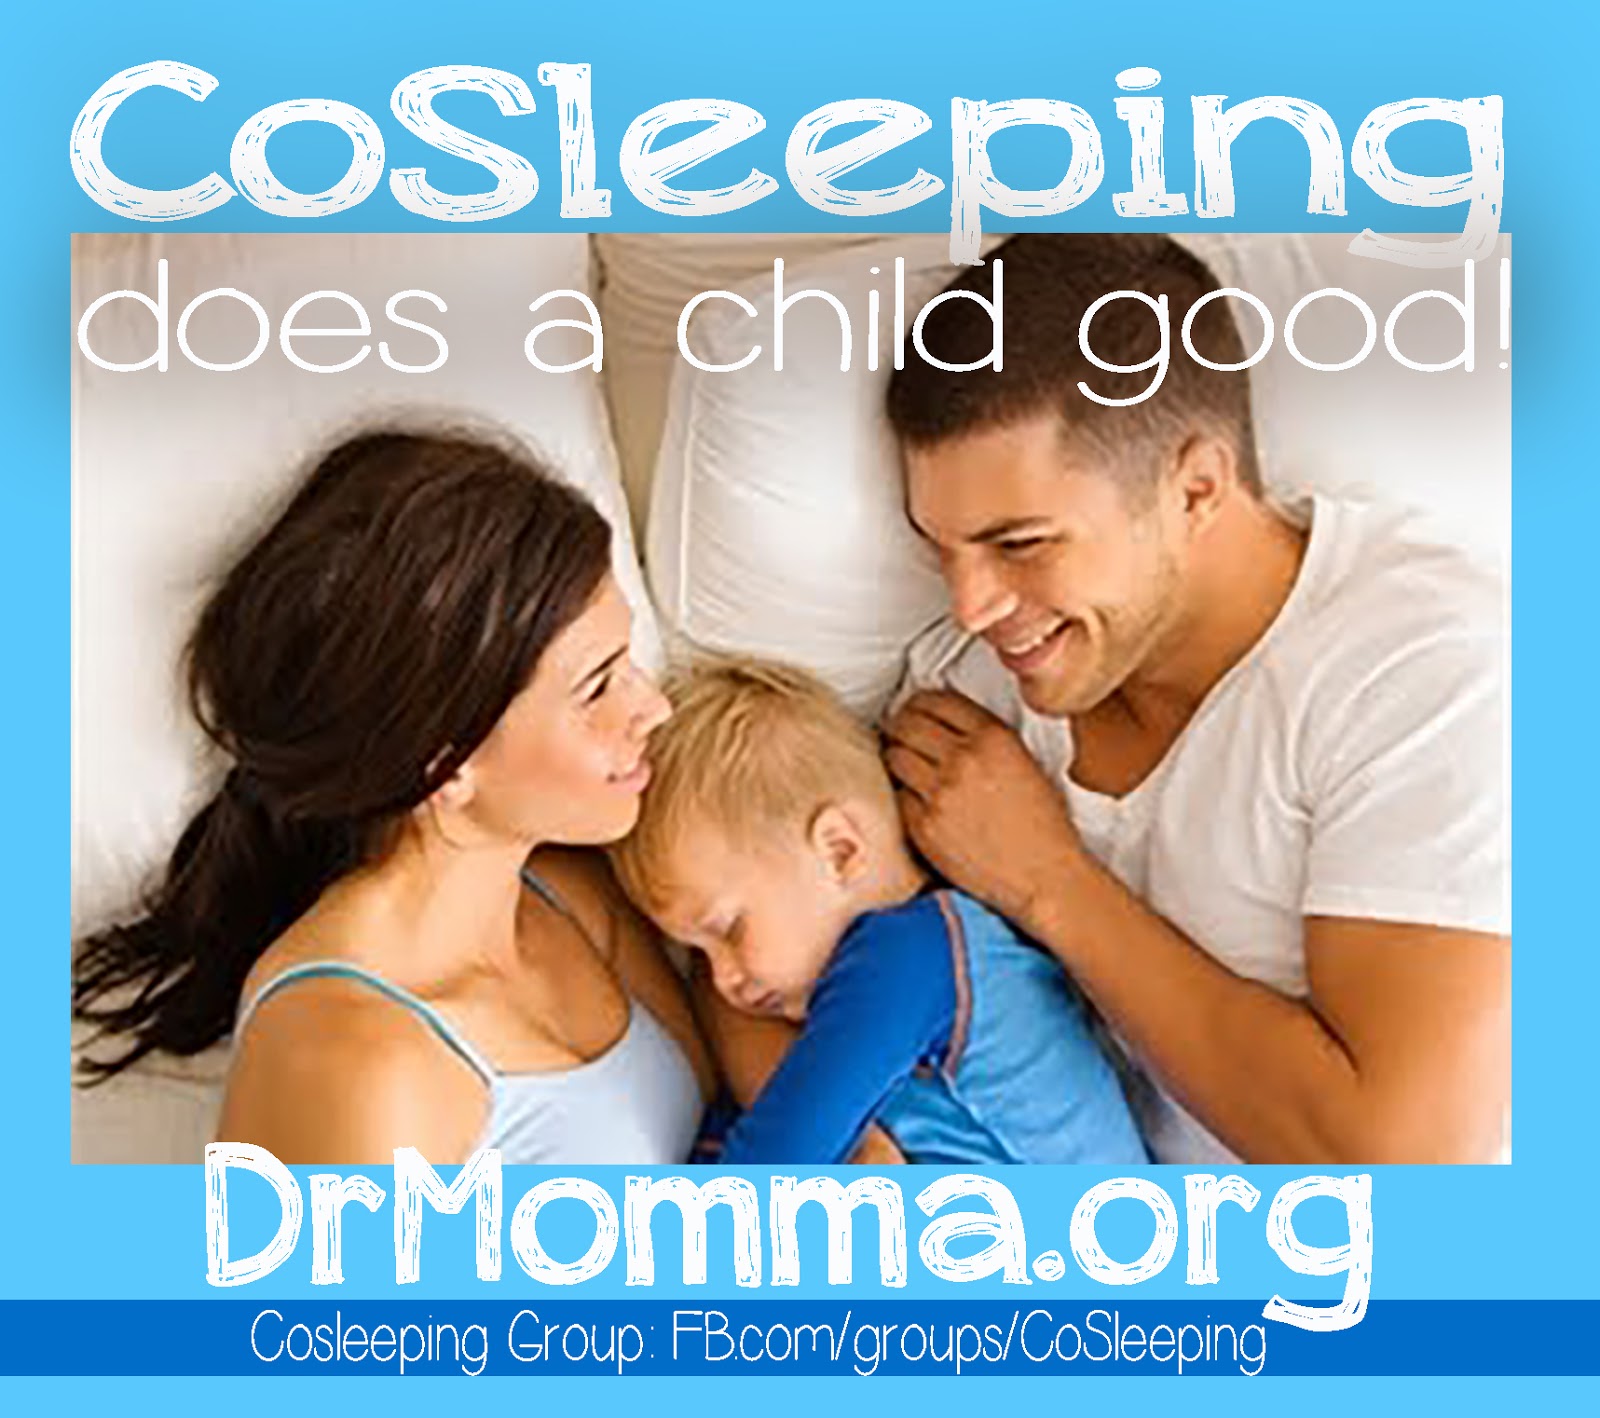 Most parents prefer co-sleeping with kids — but reveal cost